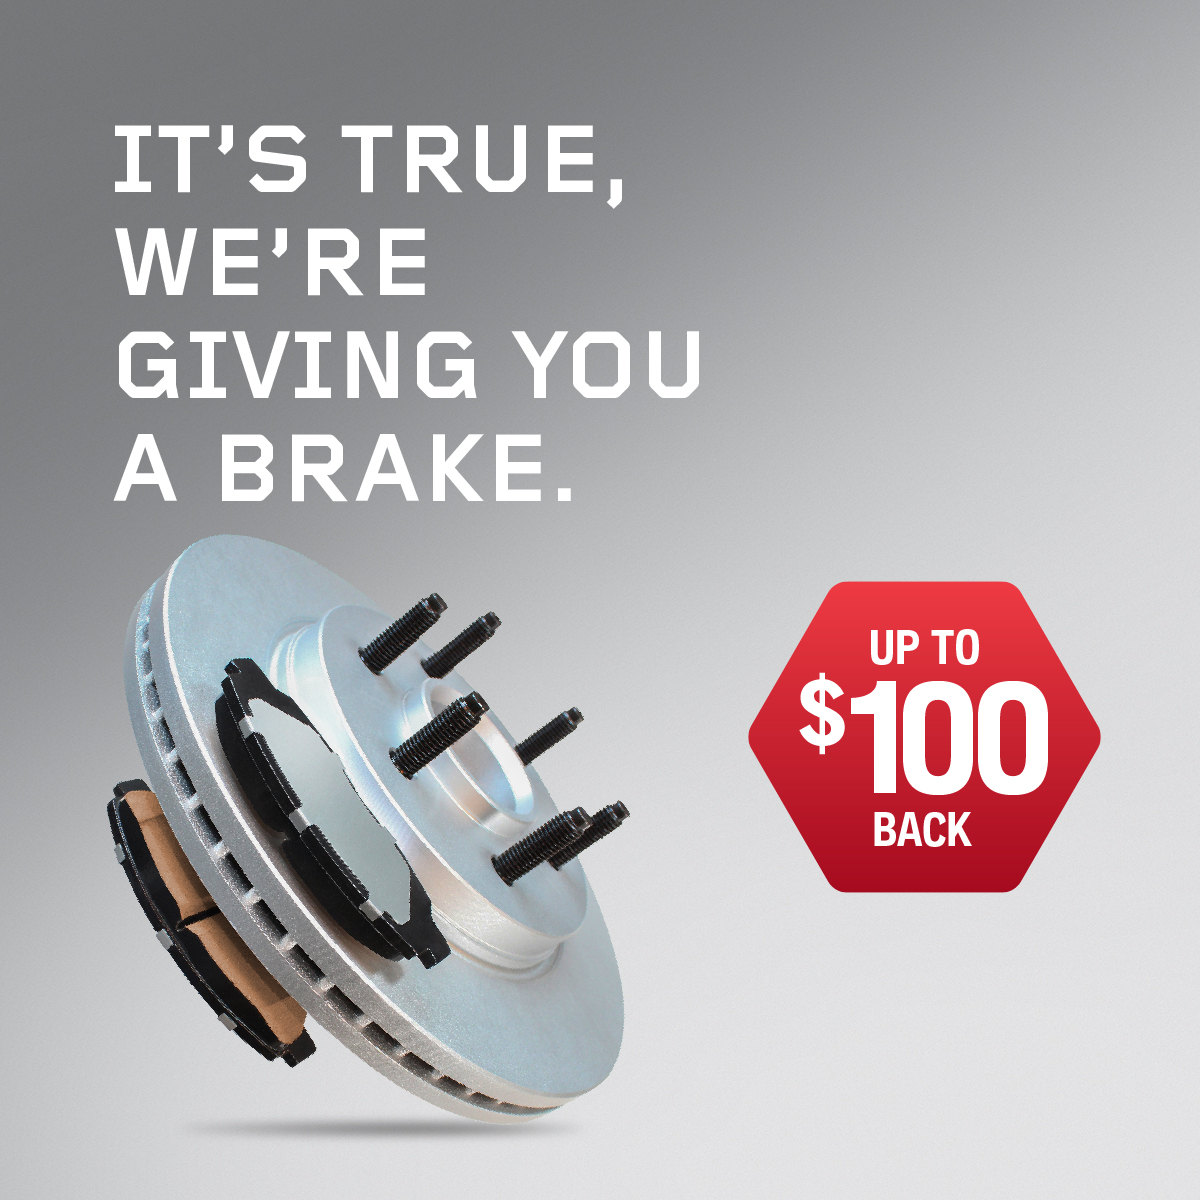 IT’S TRUE,
WE'RE GIVING YOU
A BRAKE.